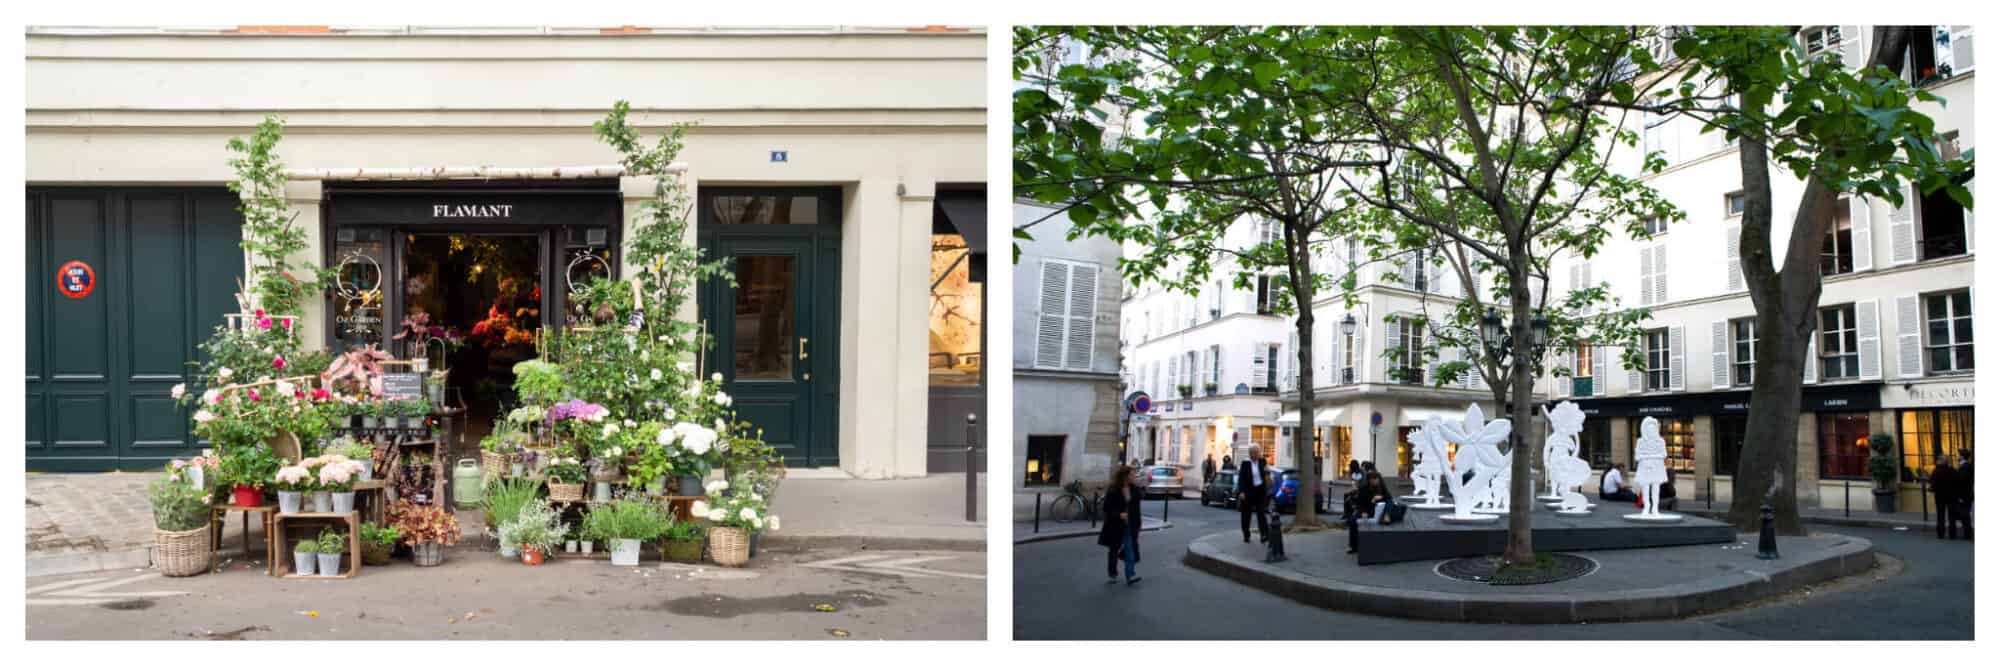 Left: A flower shop on the street in Paris' left bank near Square Paul-Langevin, right: Square Paul-Langevin on a spring day in Paris, with green leaves in the trees and people walking on the streets.